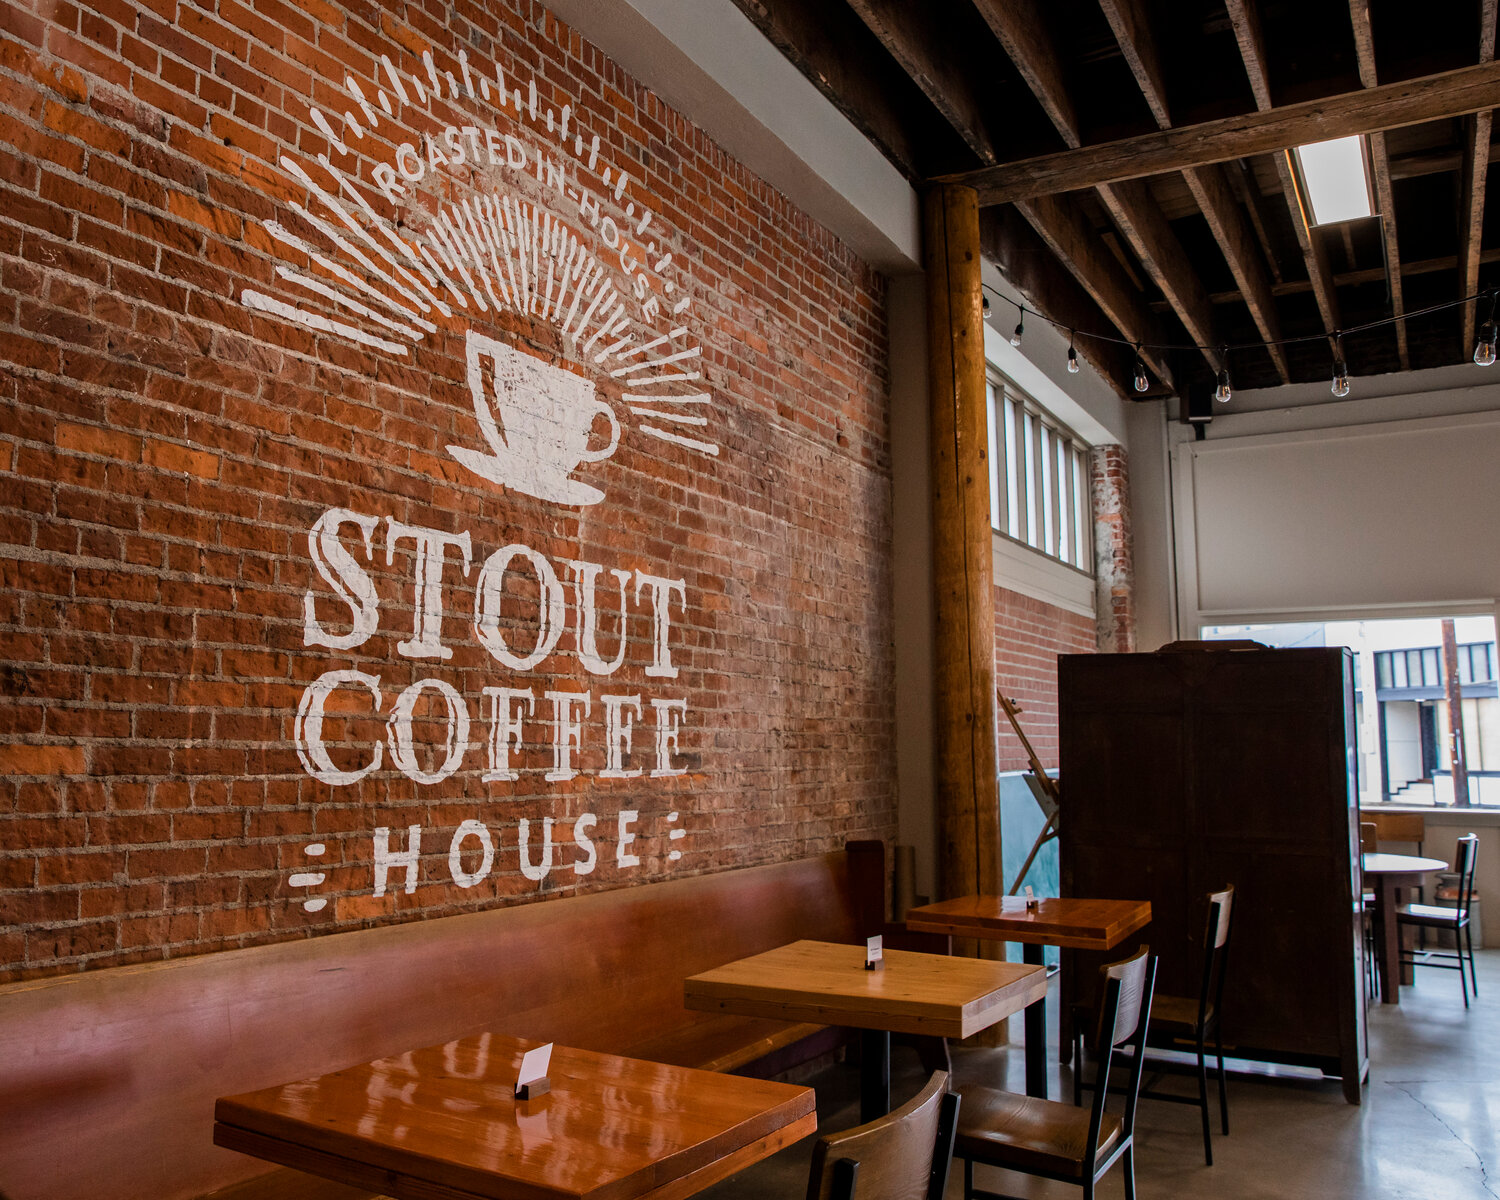 Stout Coffee House is located at 517 Northwest Pacific Ave. in Chehalis.